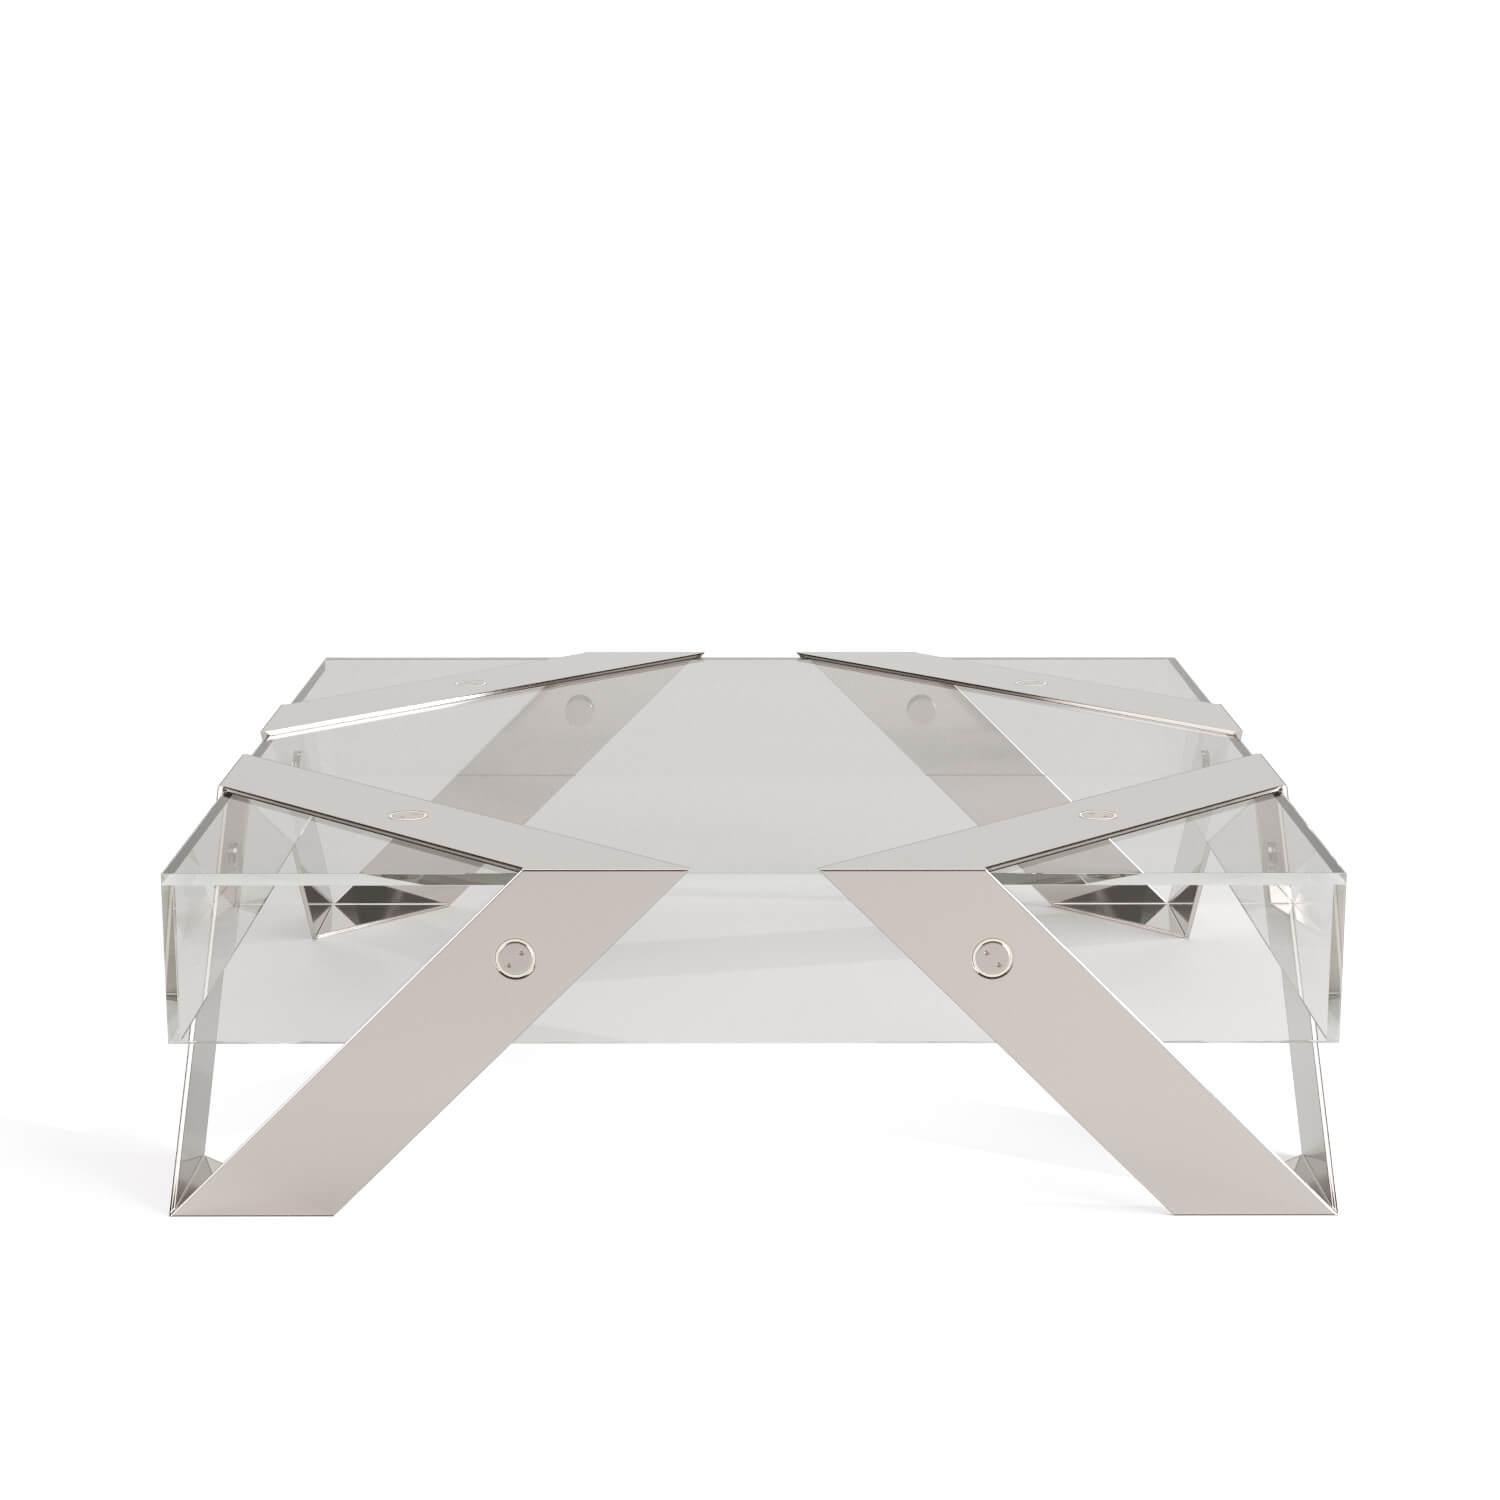 Lacquered Modern Minimalist Square Center Coffee Table Walnut Wood Brushed Stainless Steel For Sale